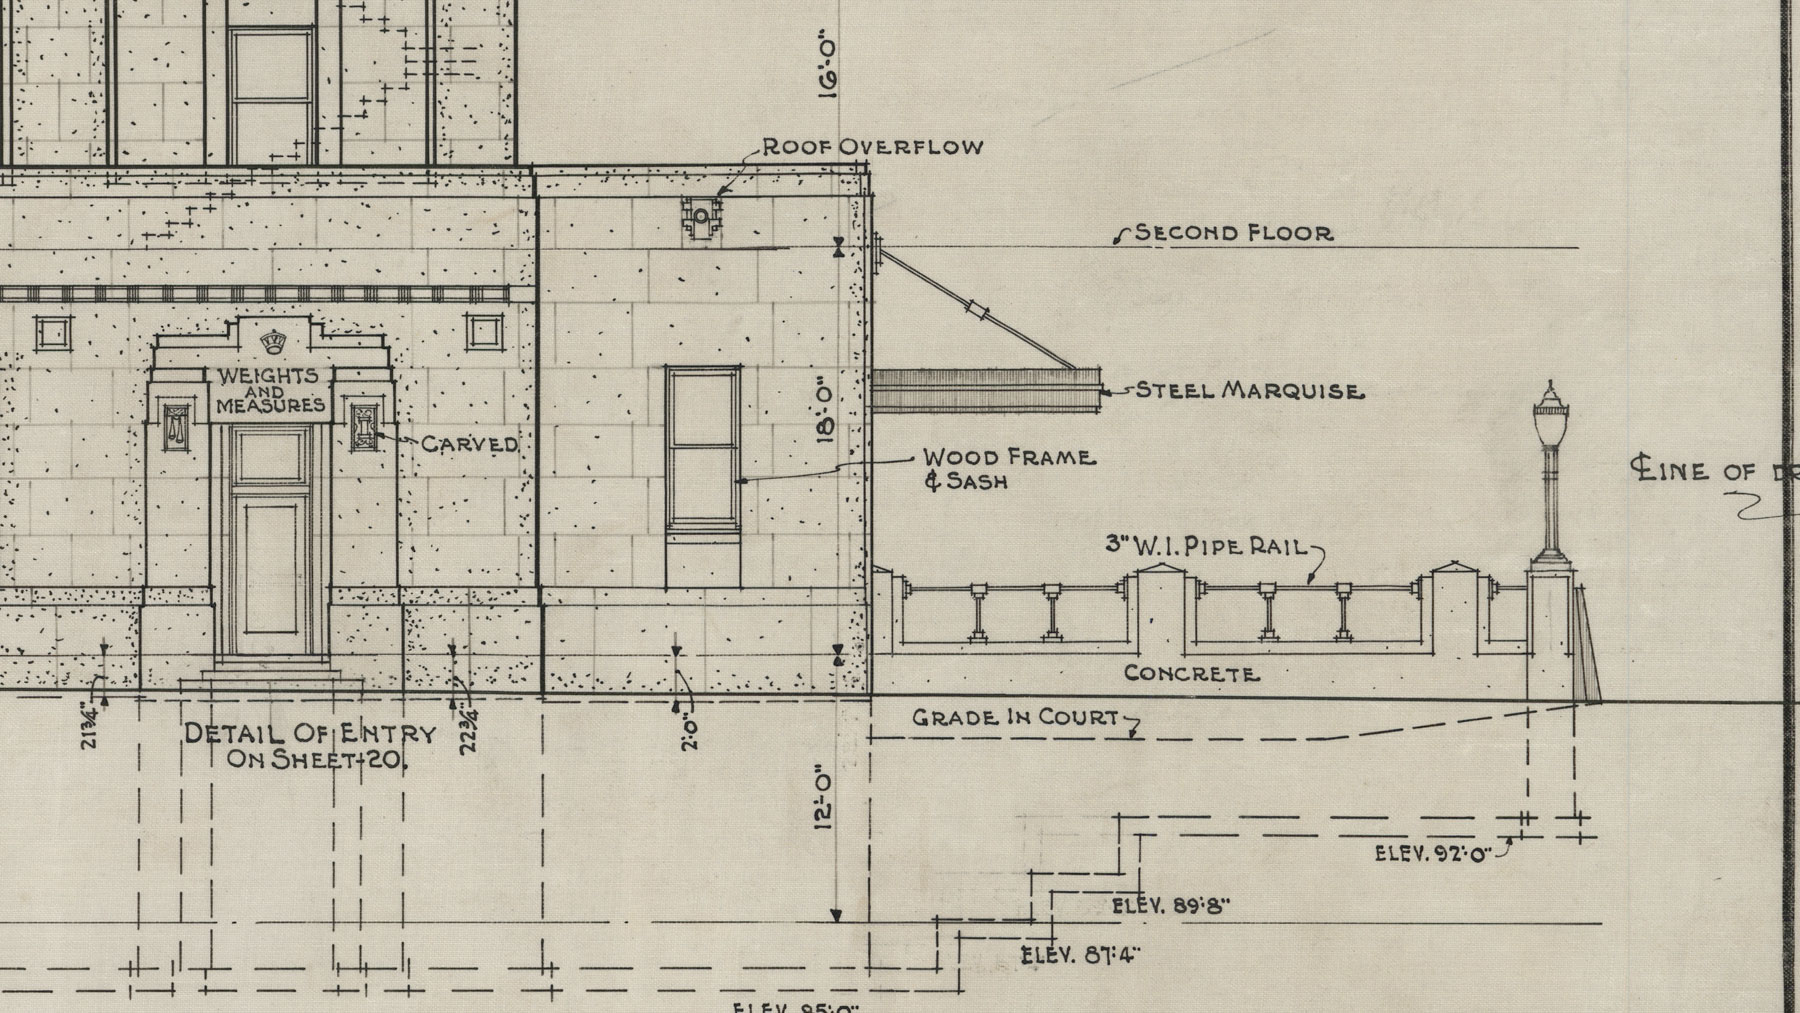 The Dominion Public Building: The Architectural Drawings - Fullarton Street Elevation
 